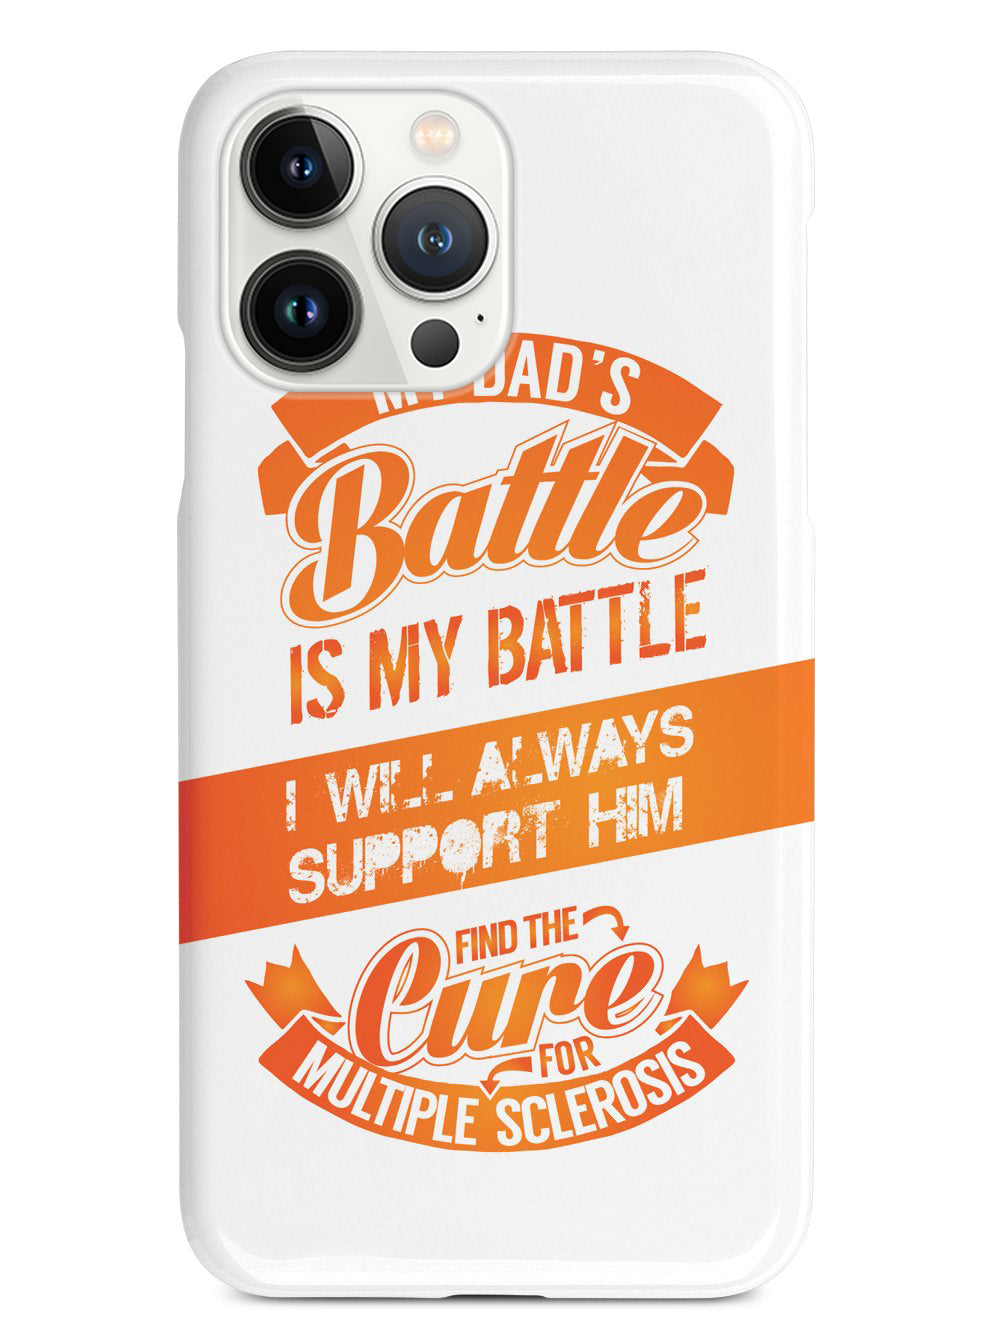 My Dad's Battle - Multiple Sclerosis Awareness/Support Case